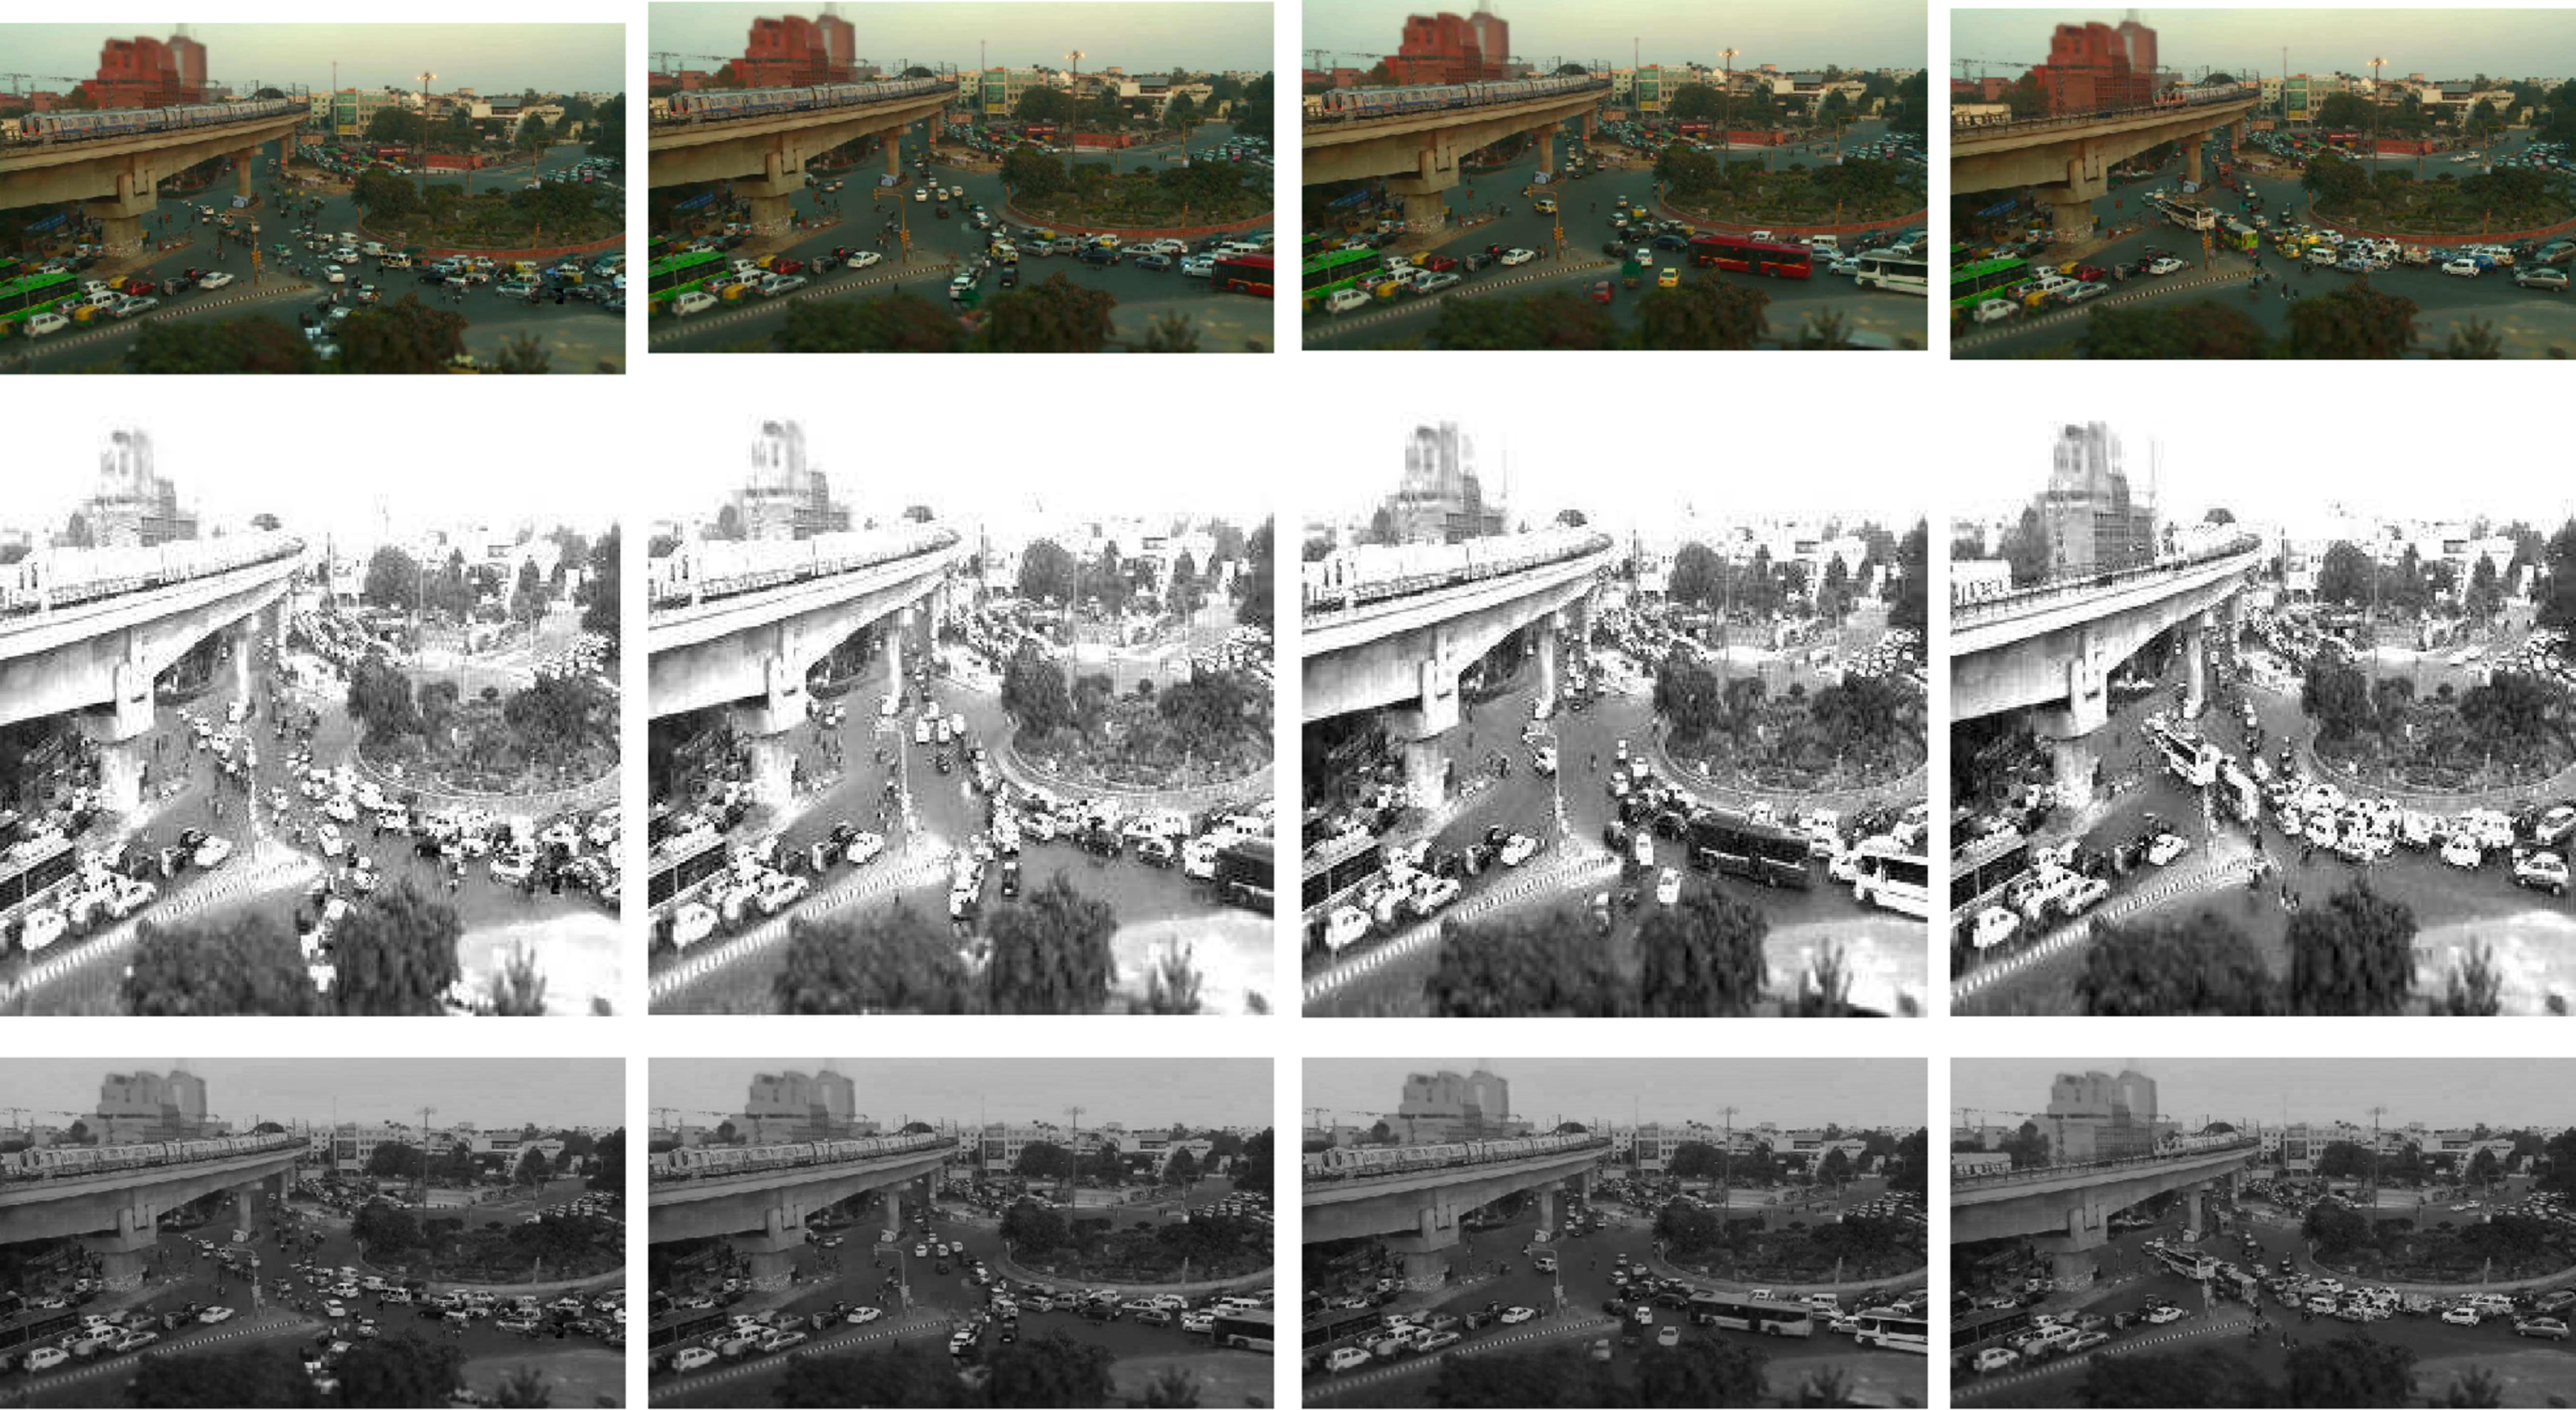 Input frames, Fuzzy contrast intensified image and the proposed algorithm’s output.